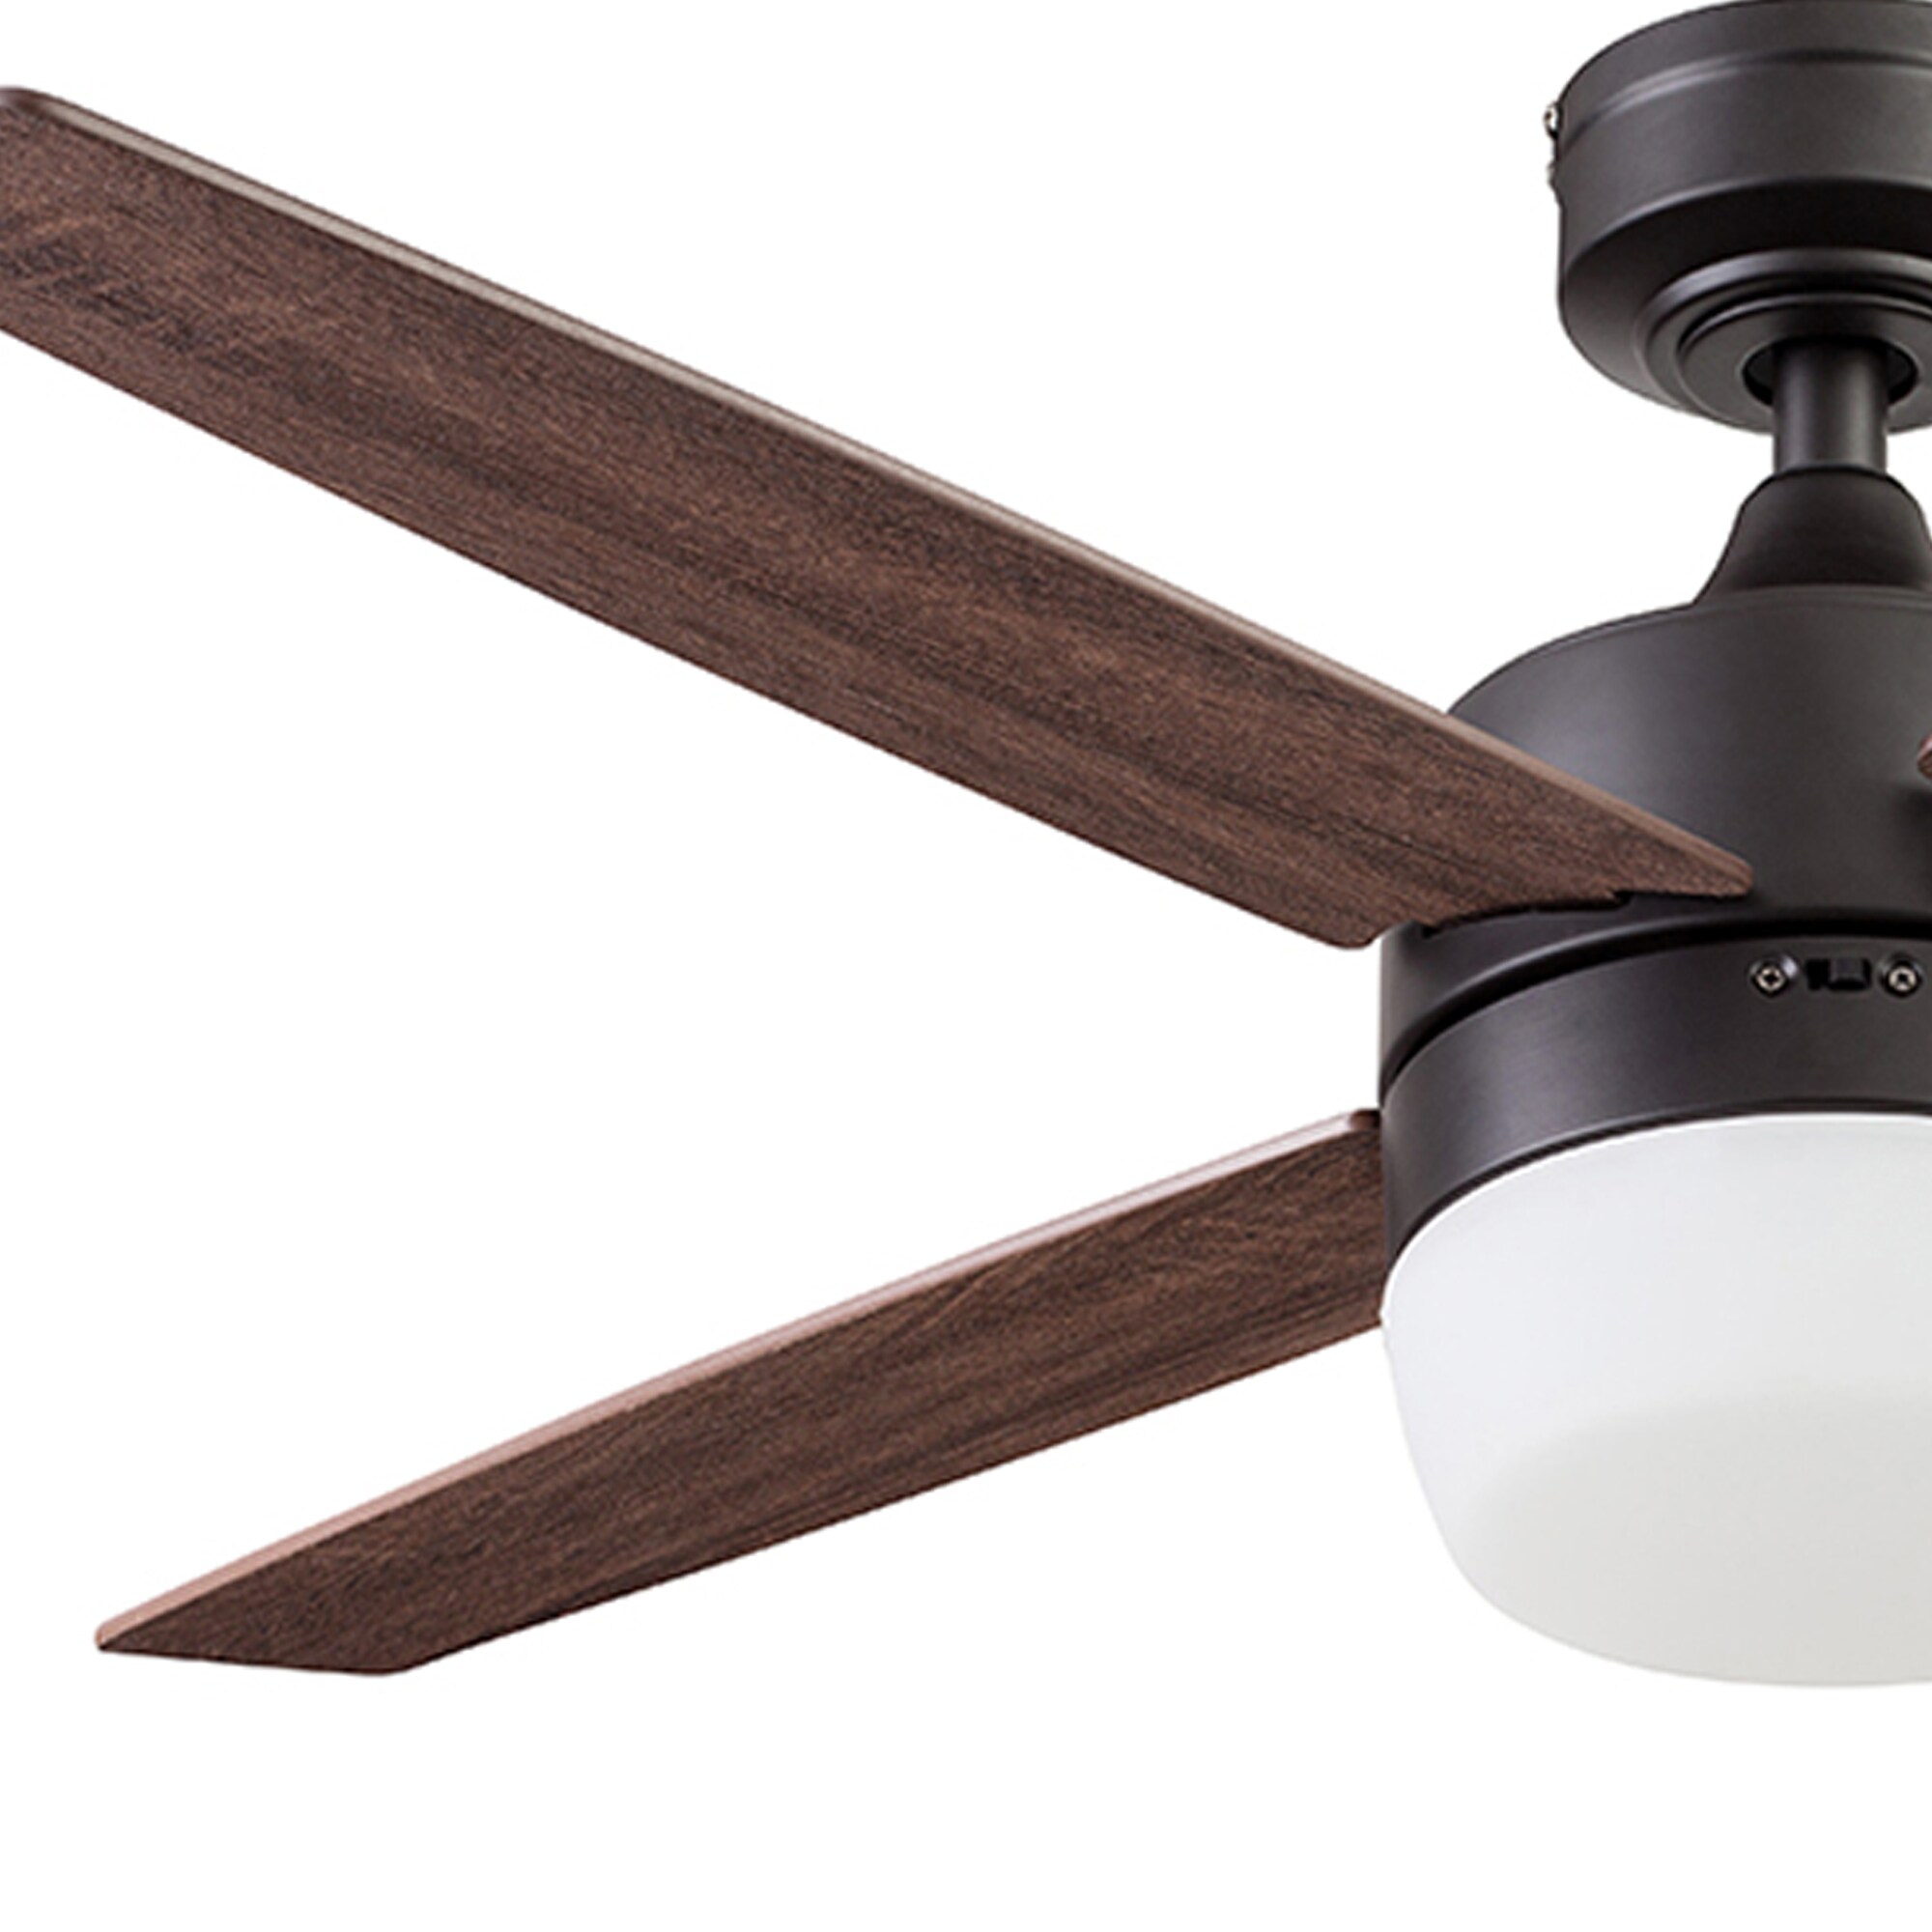 Prominence Home Atlas 44-in Bronze Indoor Ceiling Fan with Light Remote (4-Blade)